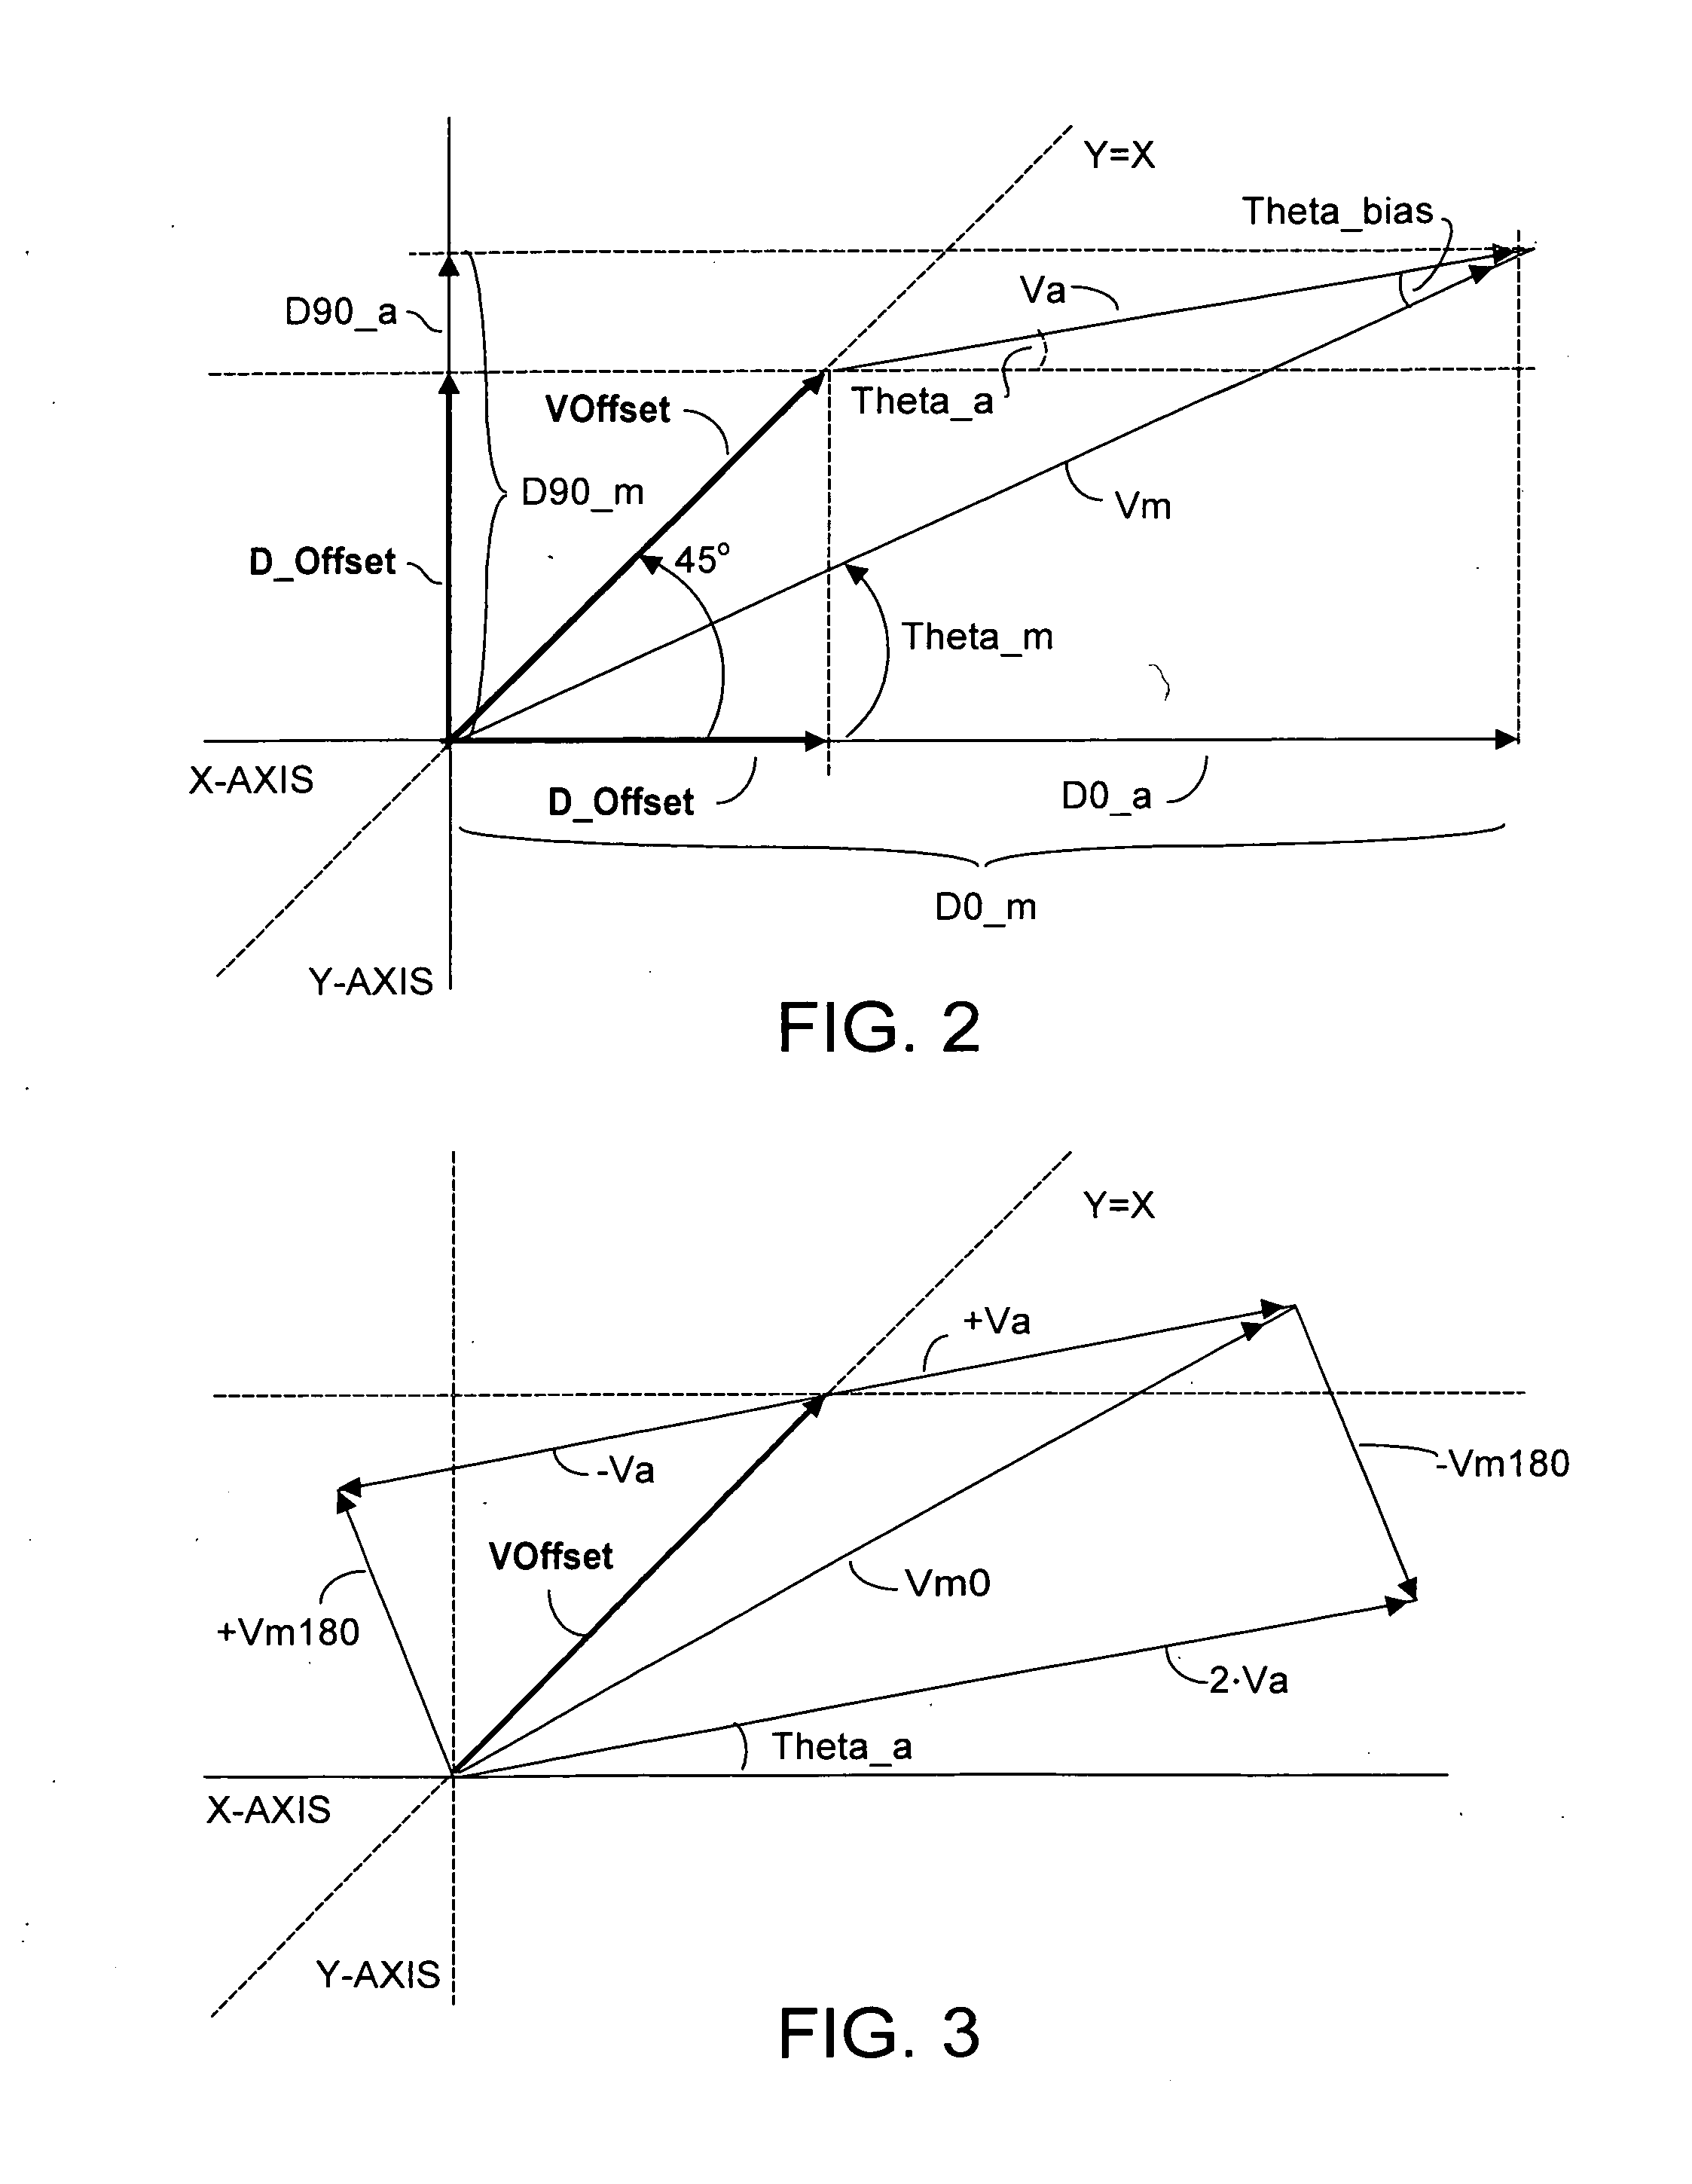 Method and system to maximize space-time resolution in a Time-of-Flight (TOF) system